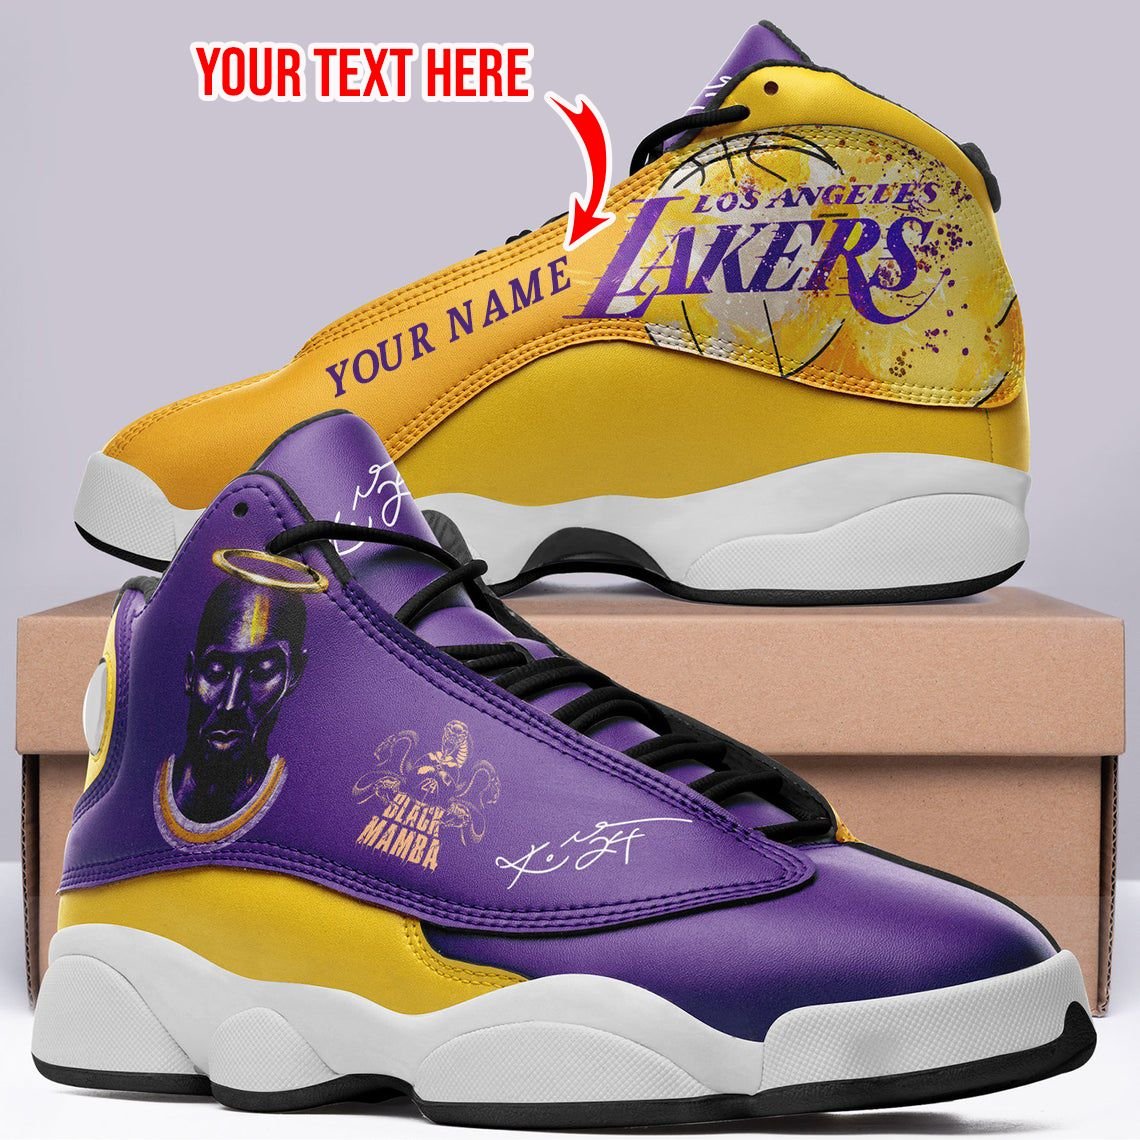 Lakers Shoes Basketball NBA Retro Sneakers Customized Shoes - HomeFavo